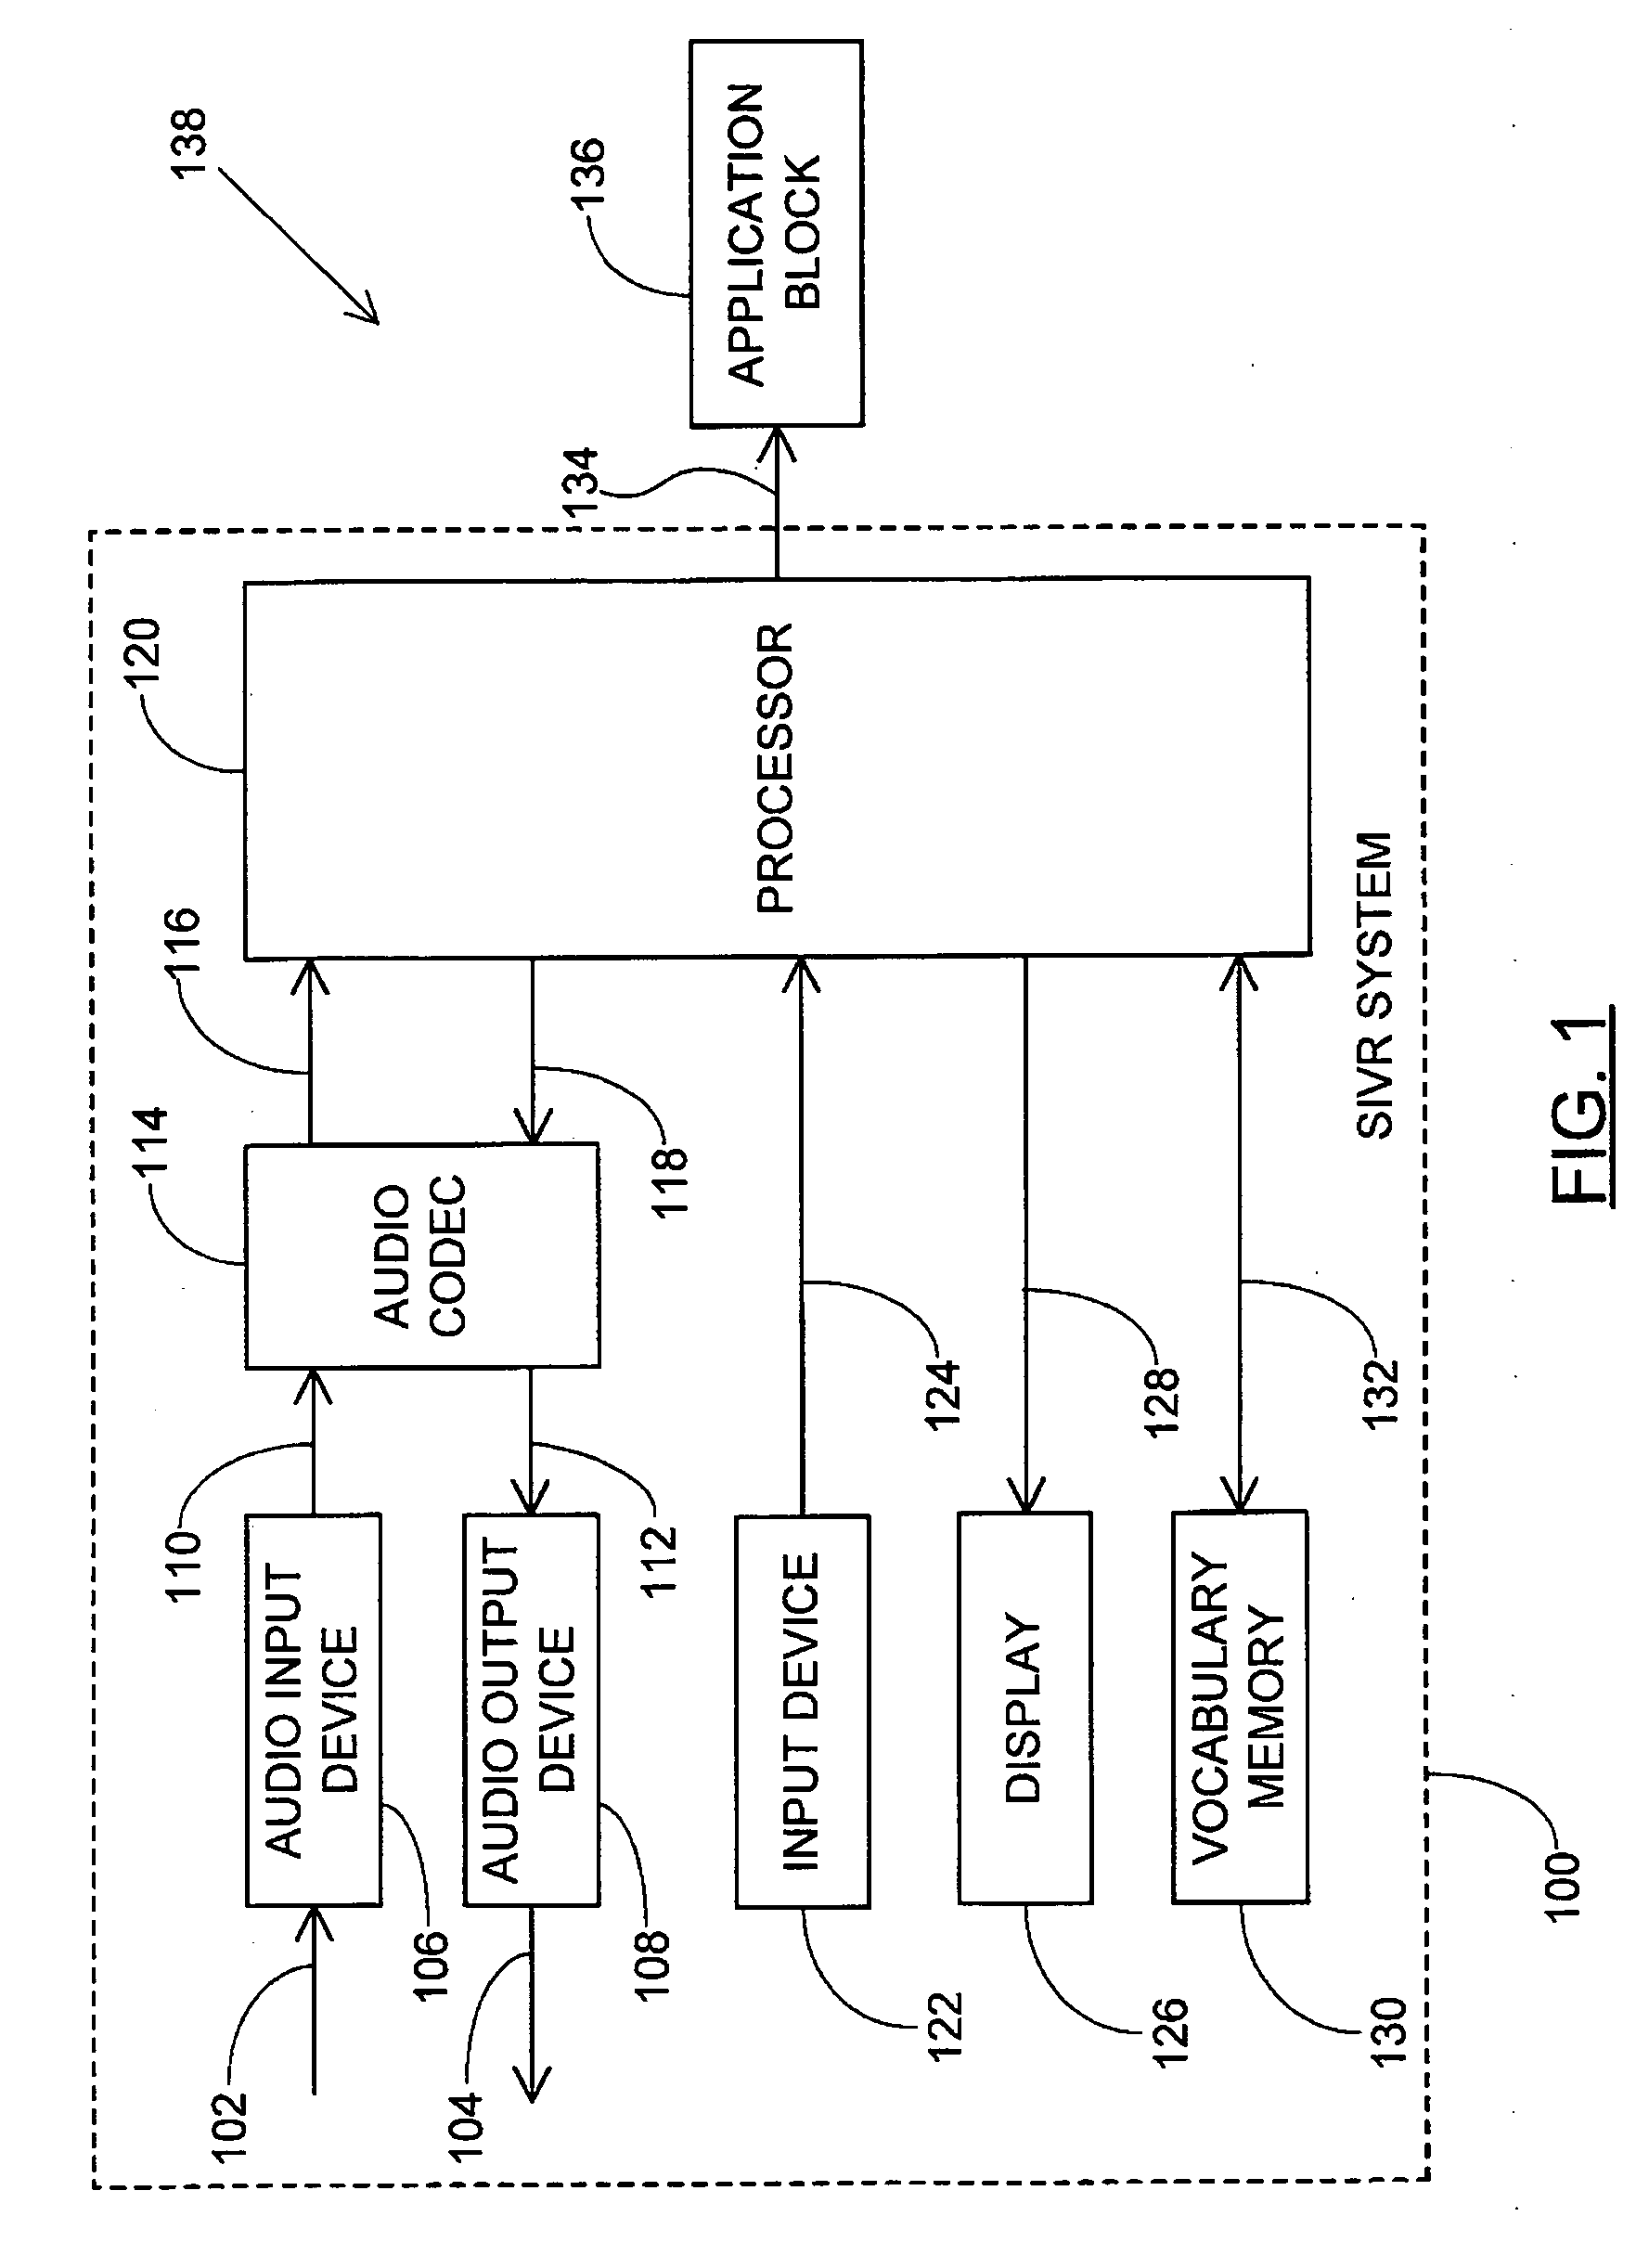 Apparatus and method for synthesized audible response to an utterance in speaker-independent voice recognition